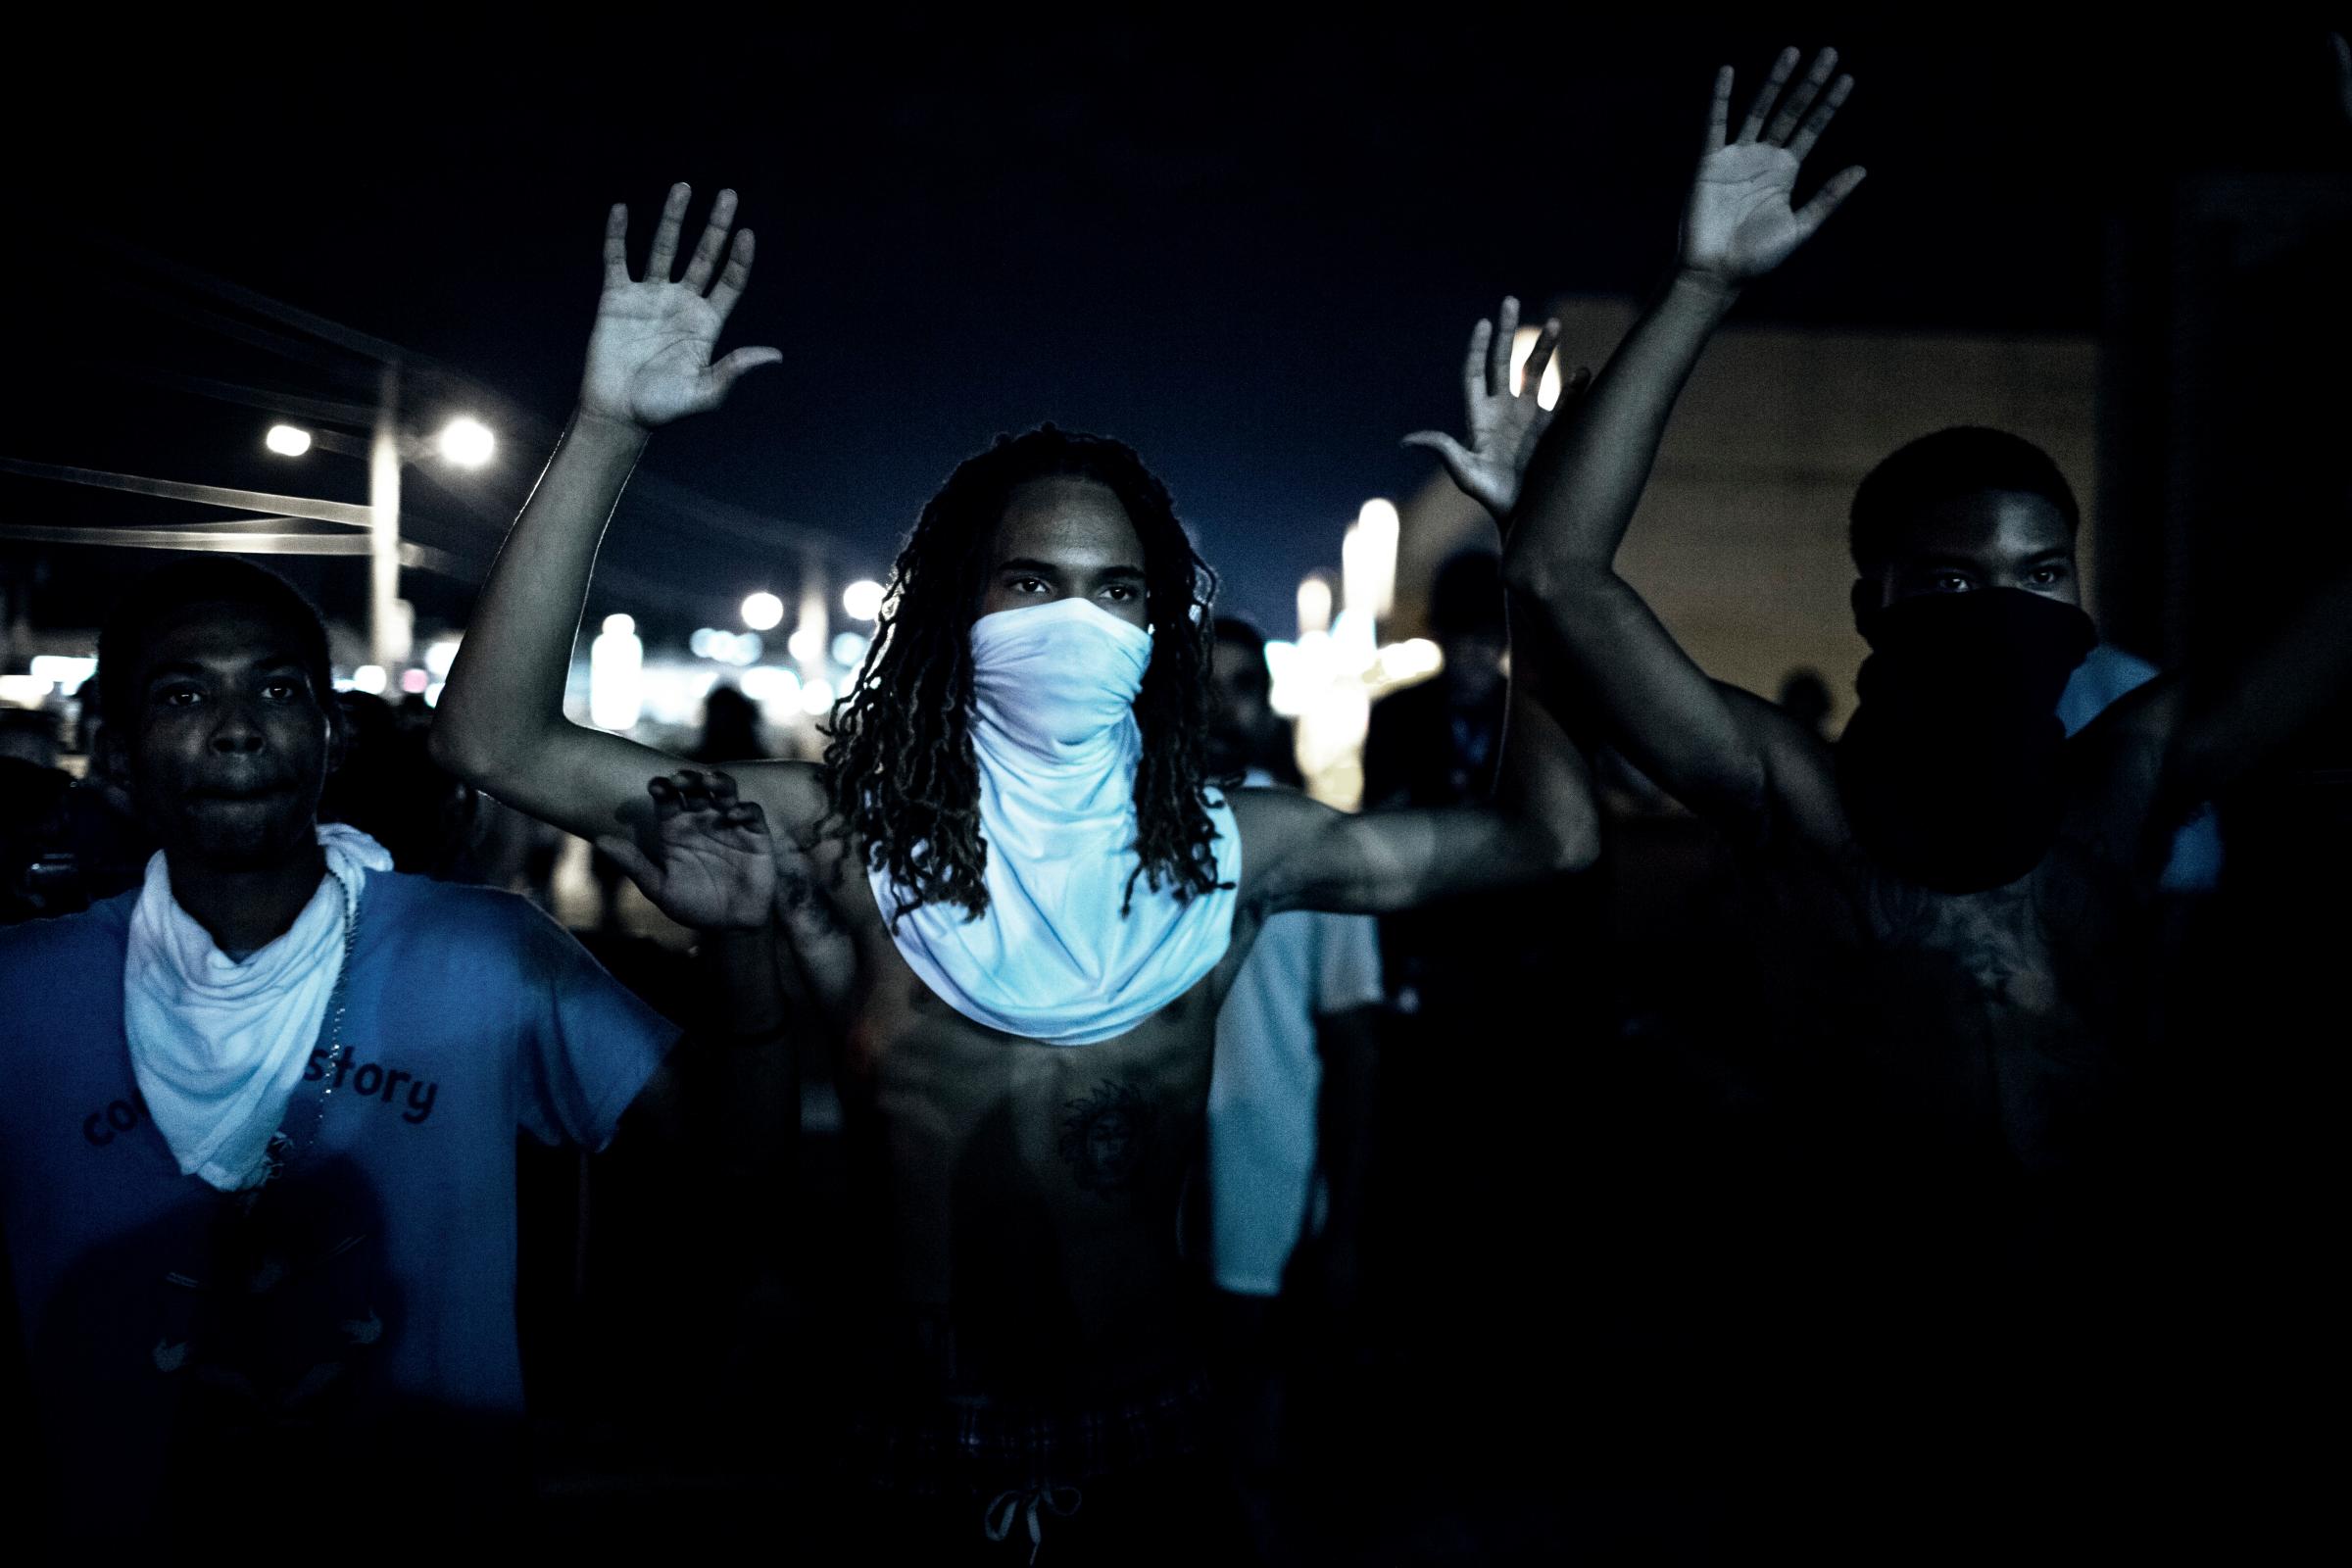 Demonstraters during clashes with police that erupted folwoing a mostly peacful protest at 12:30 AM on Wednesday, Aug 20, 2014 in Furguson, MO.Photograph by ANDREW CUTRAROÑREDUX FOR TIMEIssue Date: September 1, 2014 / U.S. Edition / Volume 184 / Number 8*FINAL *LOW RESFROM SHOOT* RETOUCHED FILE* Please contact photographer for usage